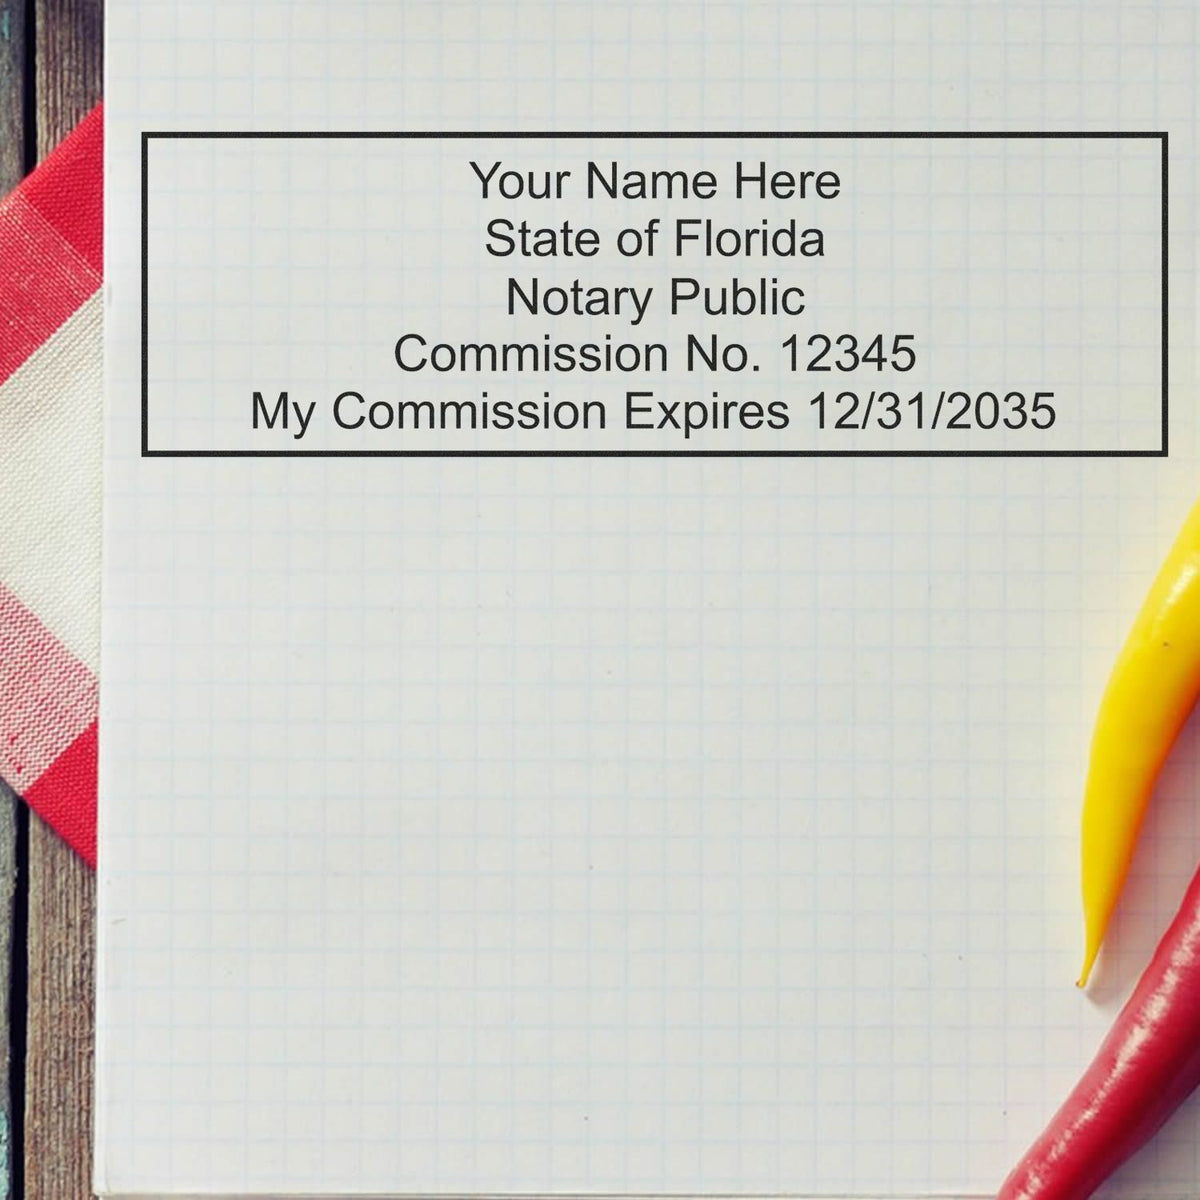 Another Example of a stamped impression of the Super Slim Florida Notary Public Stamp on a piece of office paper.